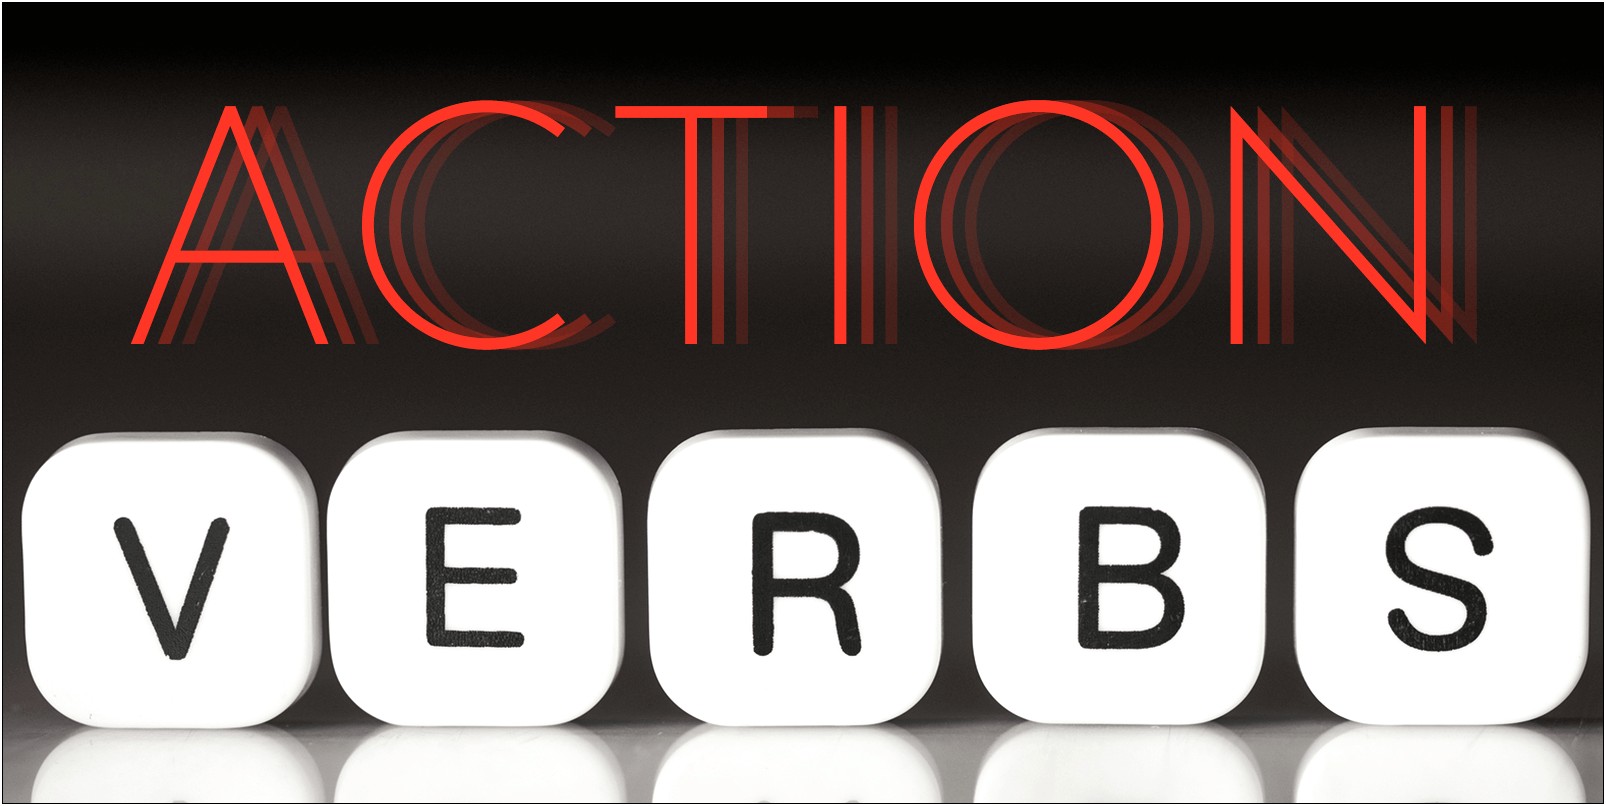 Best Action Verbs To Use On A Resume